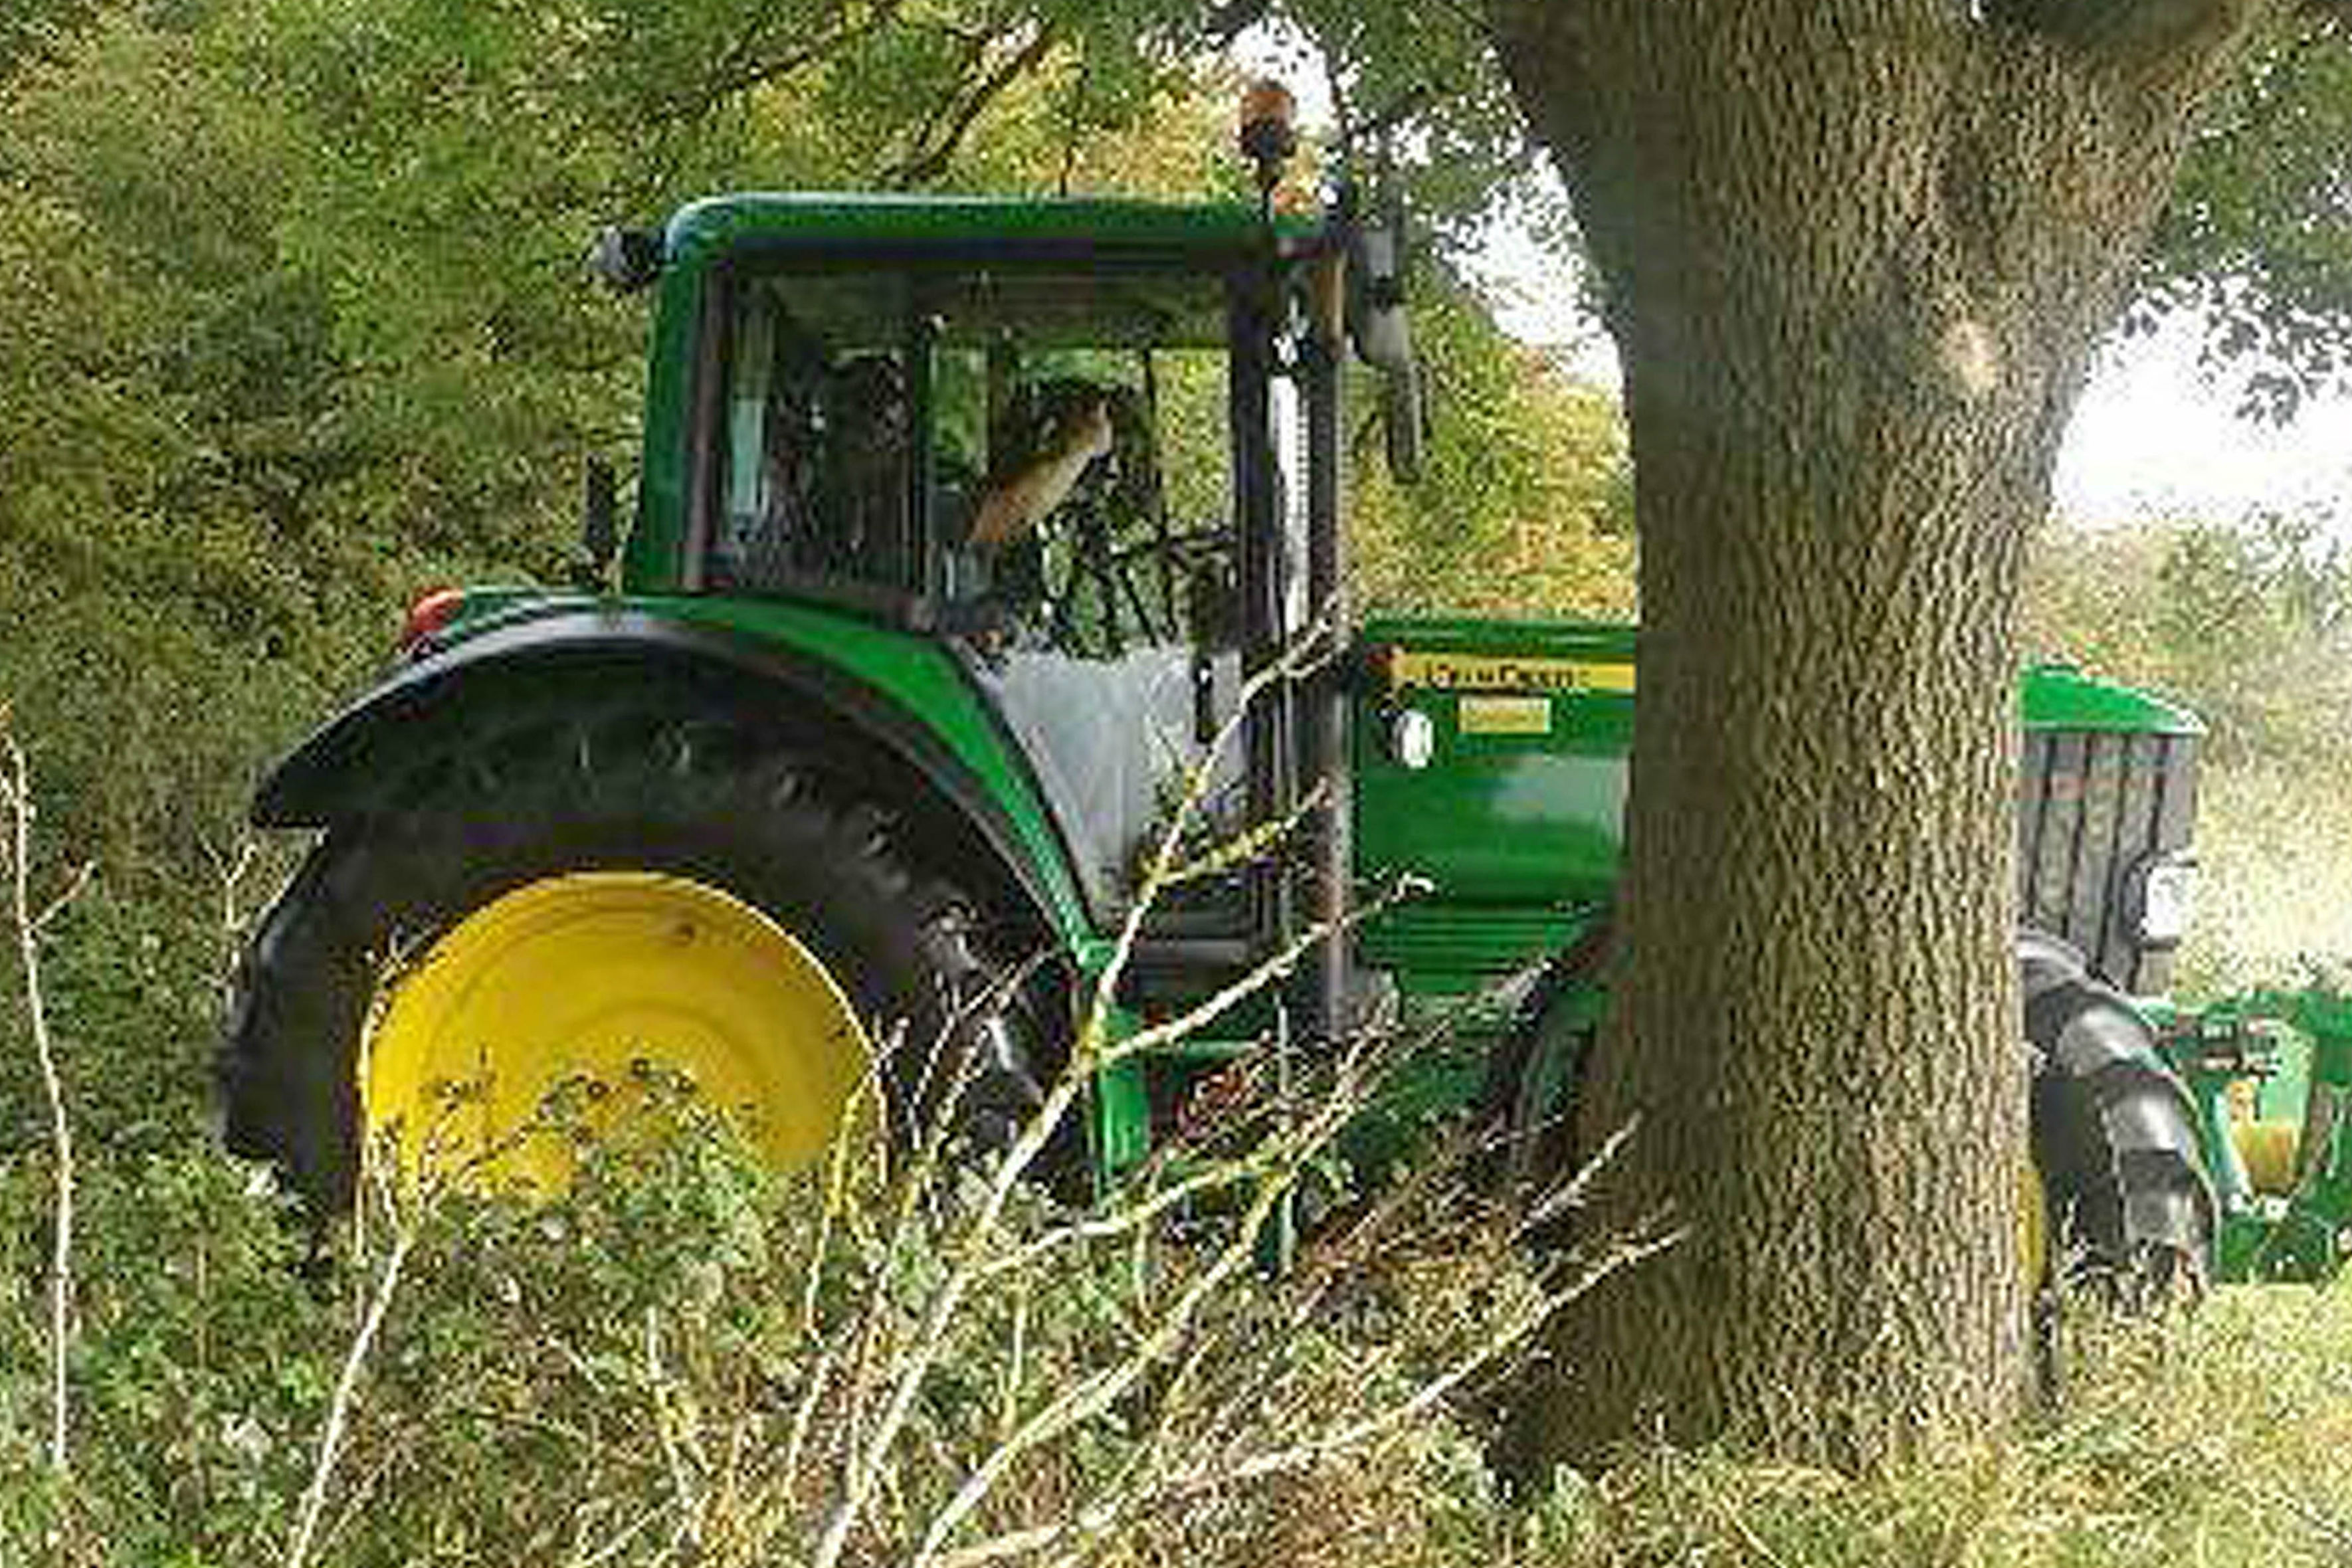 Police catch speeding motorcyclists by hiding in a tractor